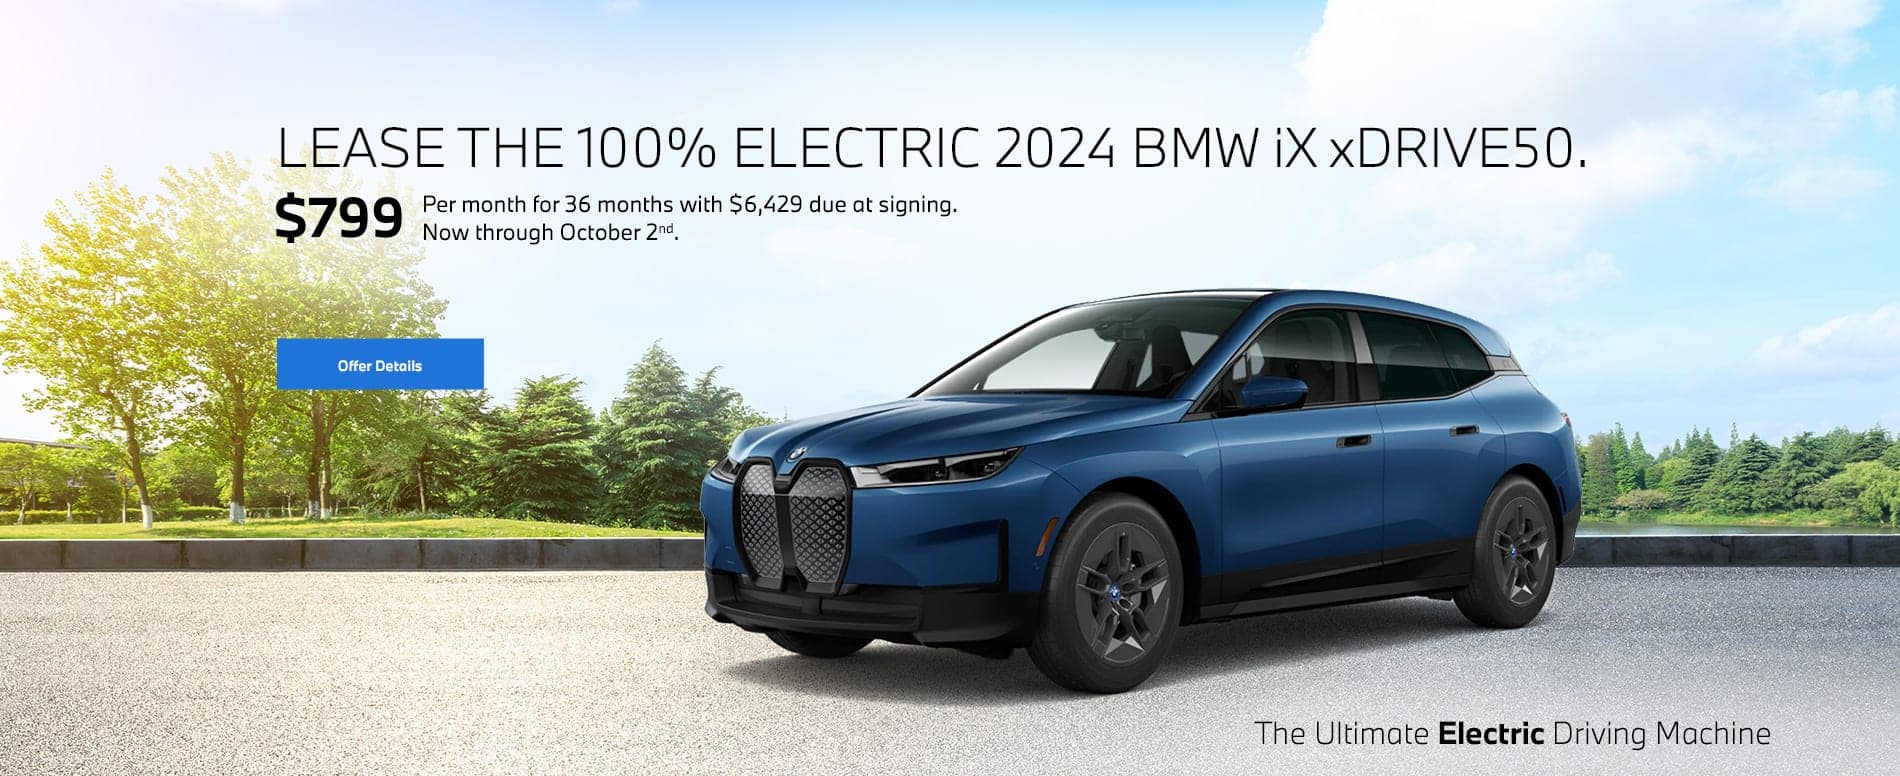 2024 iX lease starting at $799 per month for 36 months